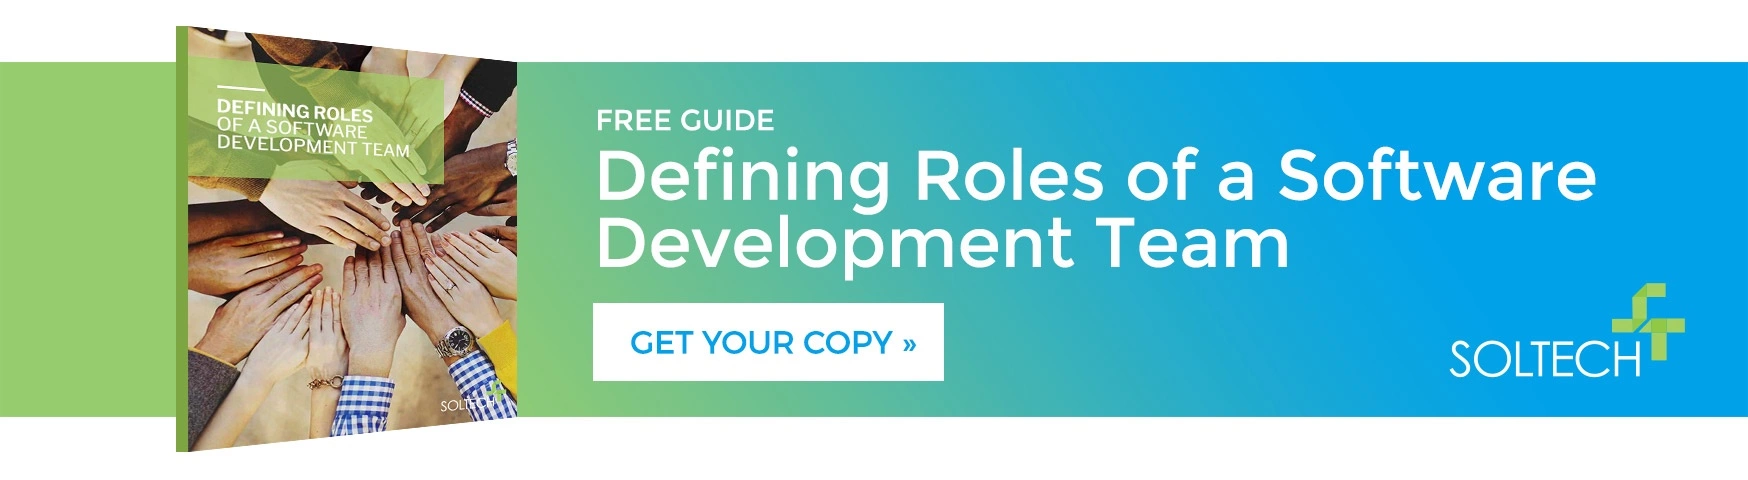 Defining Roles of a Software Development Team free guide